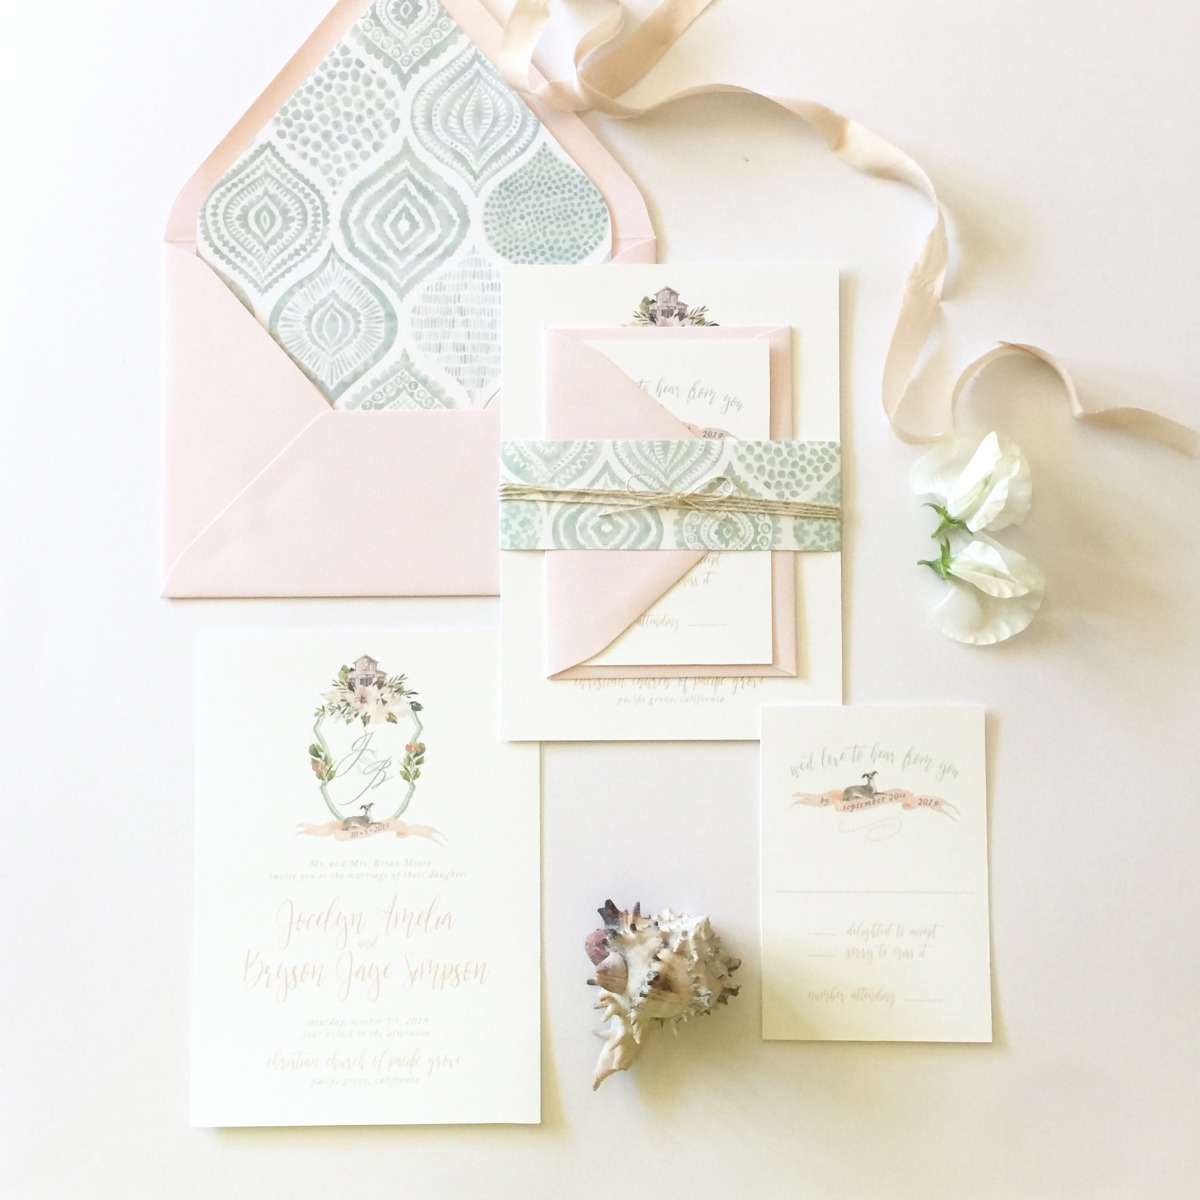 Custom Wedding Invitations Set the Tone for your Perfect Day